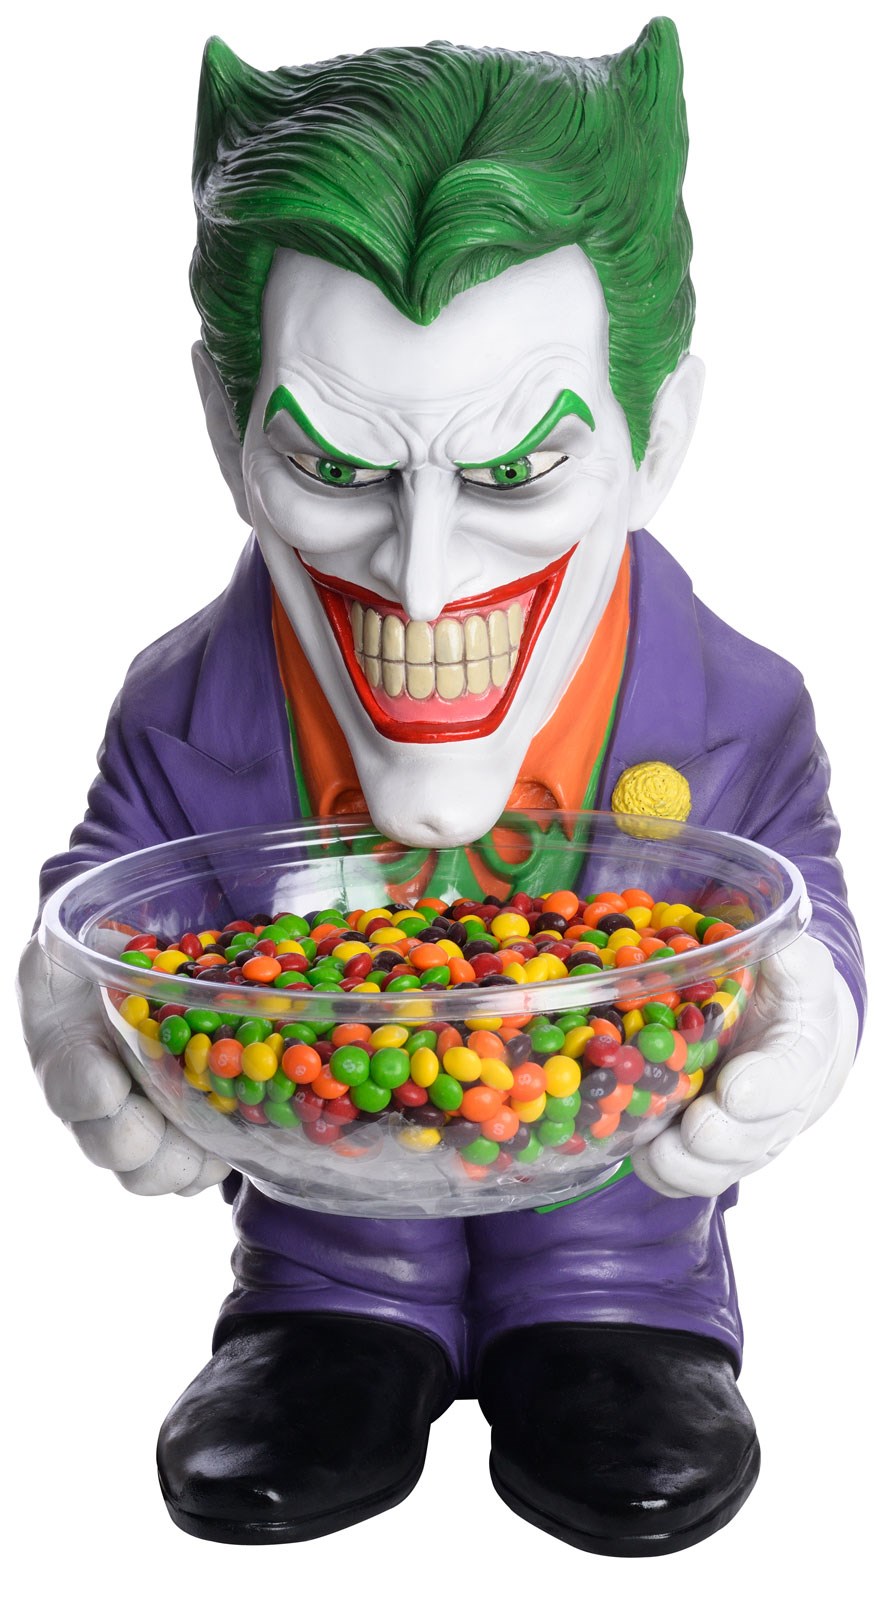 The Joker Candy Bowl and Holder